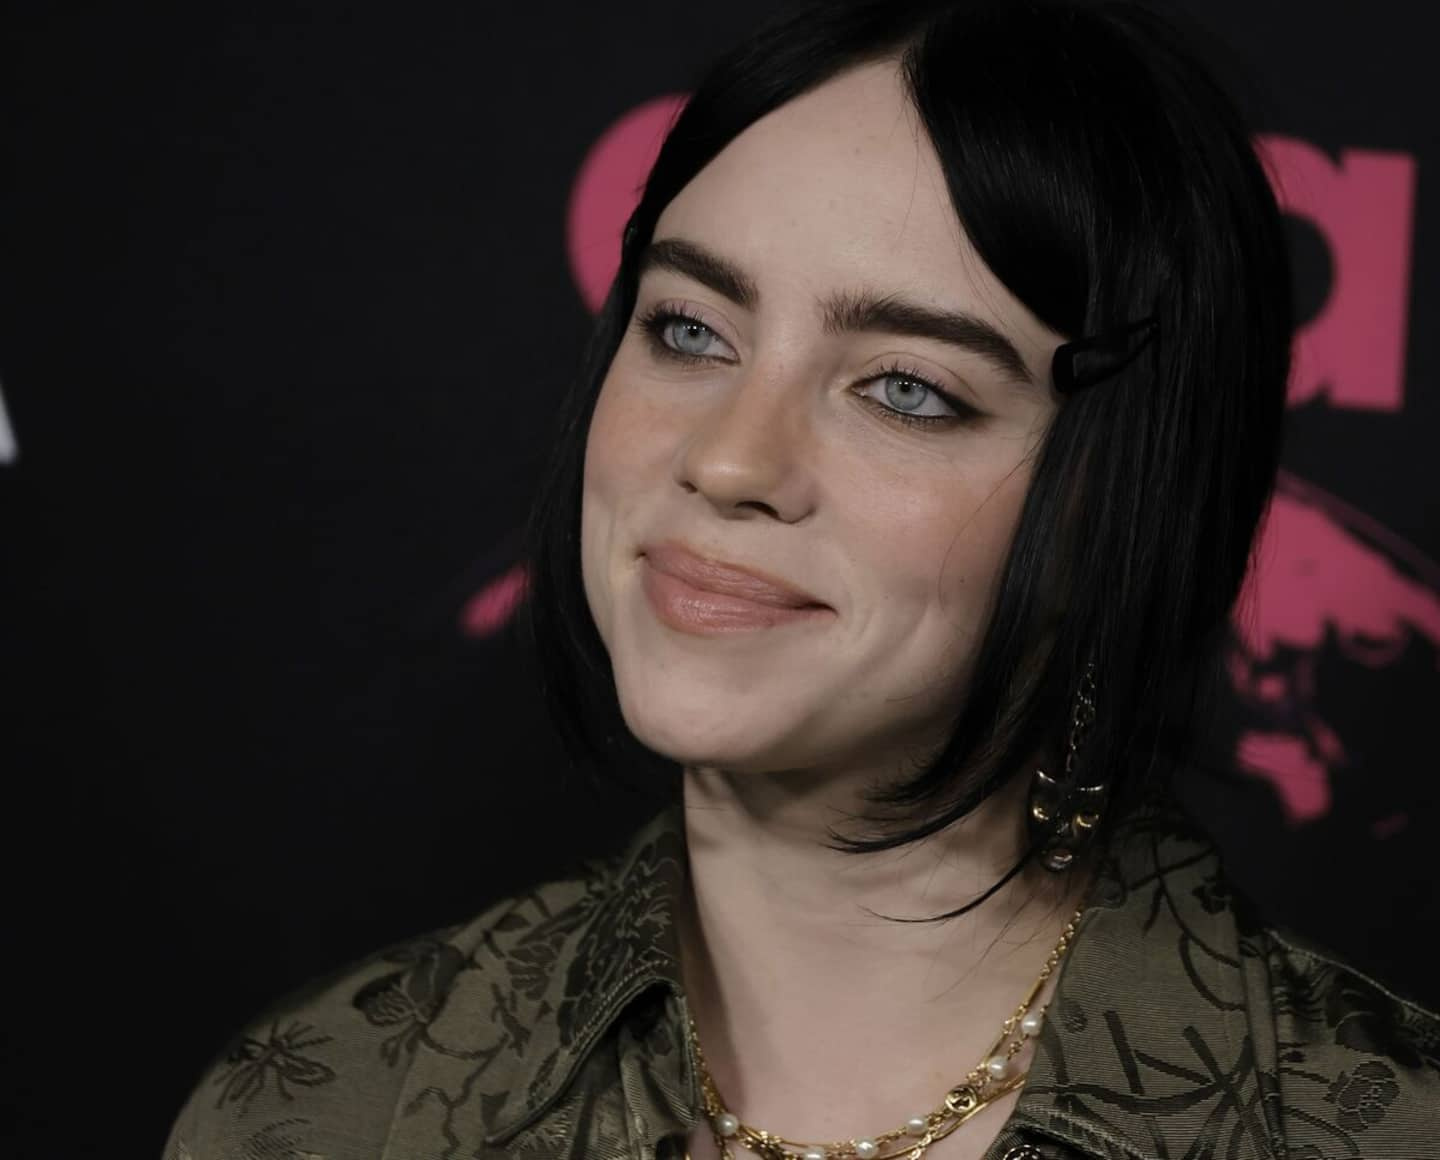 Billie Eilish was inspired by her iron deficiency for her latest perfume